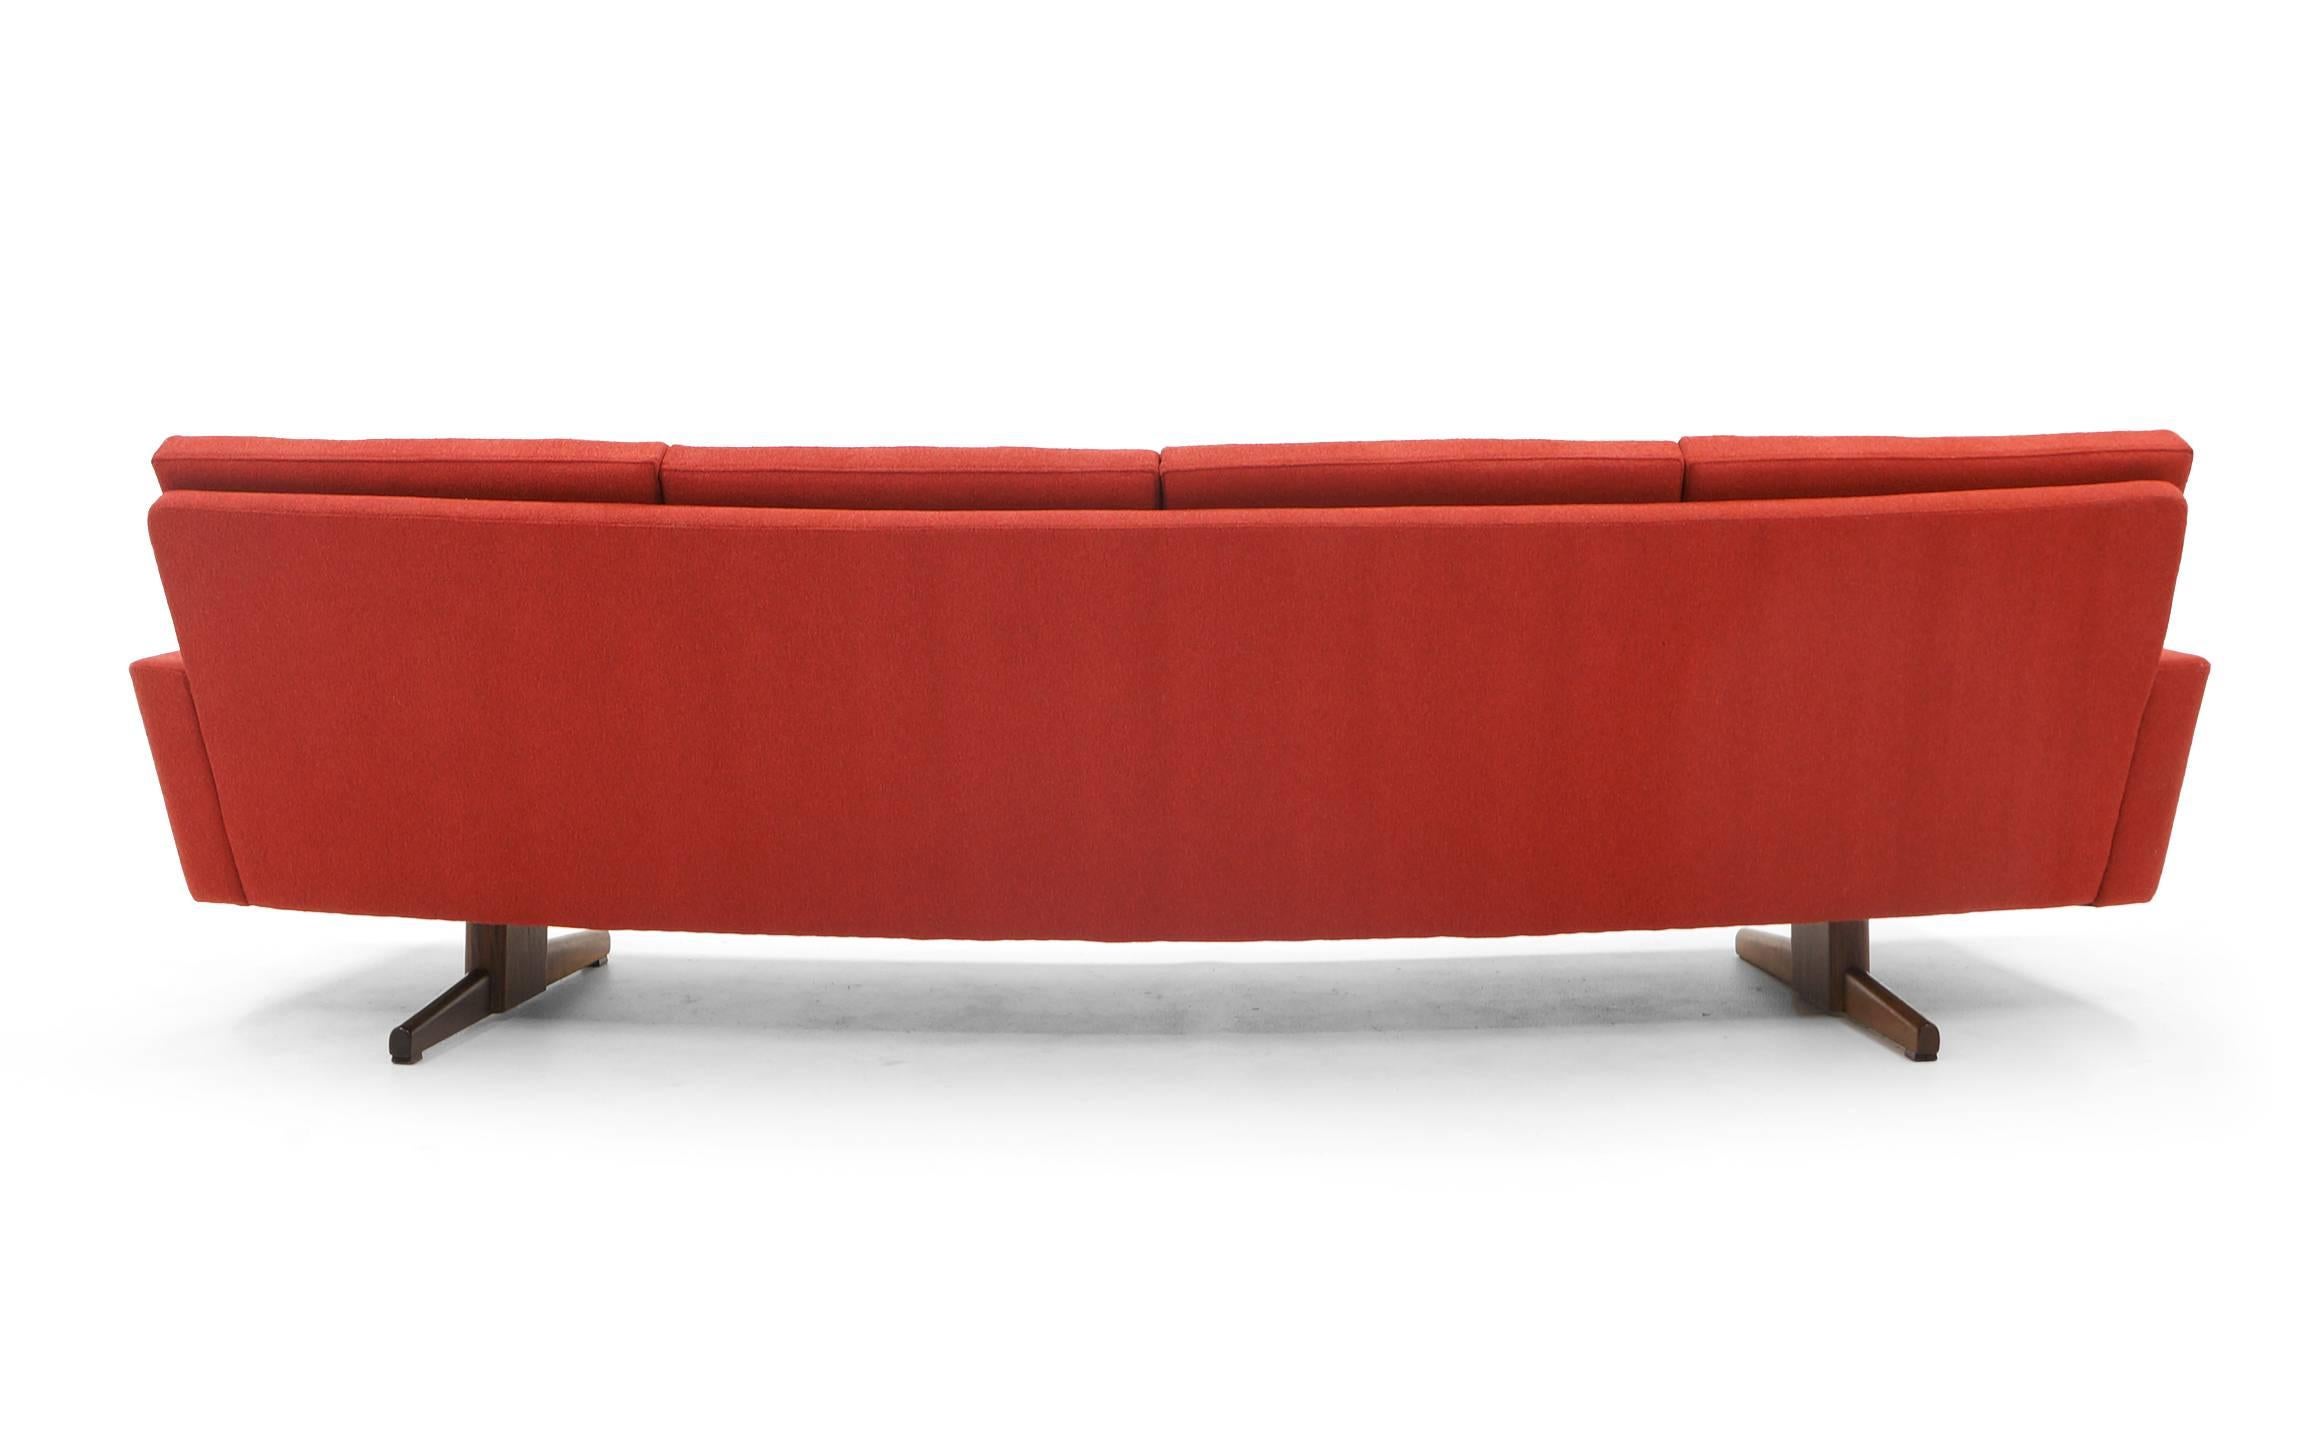 Mid-20th Century Curved Sofa by Frederick Kayser Restored Redone in Rich Red Knoll Cuddle Cloth